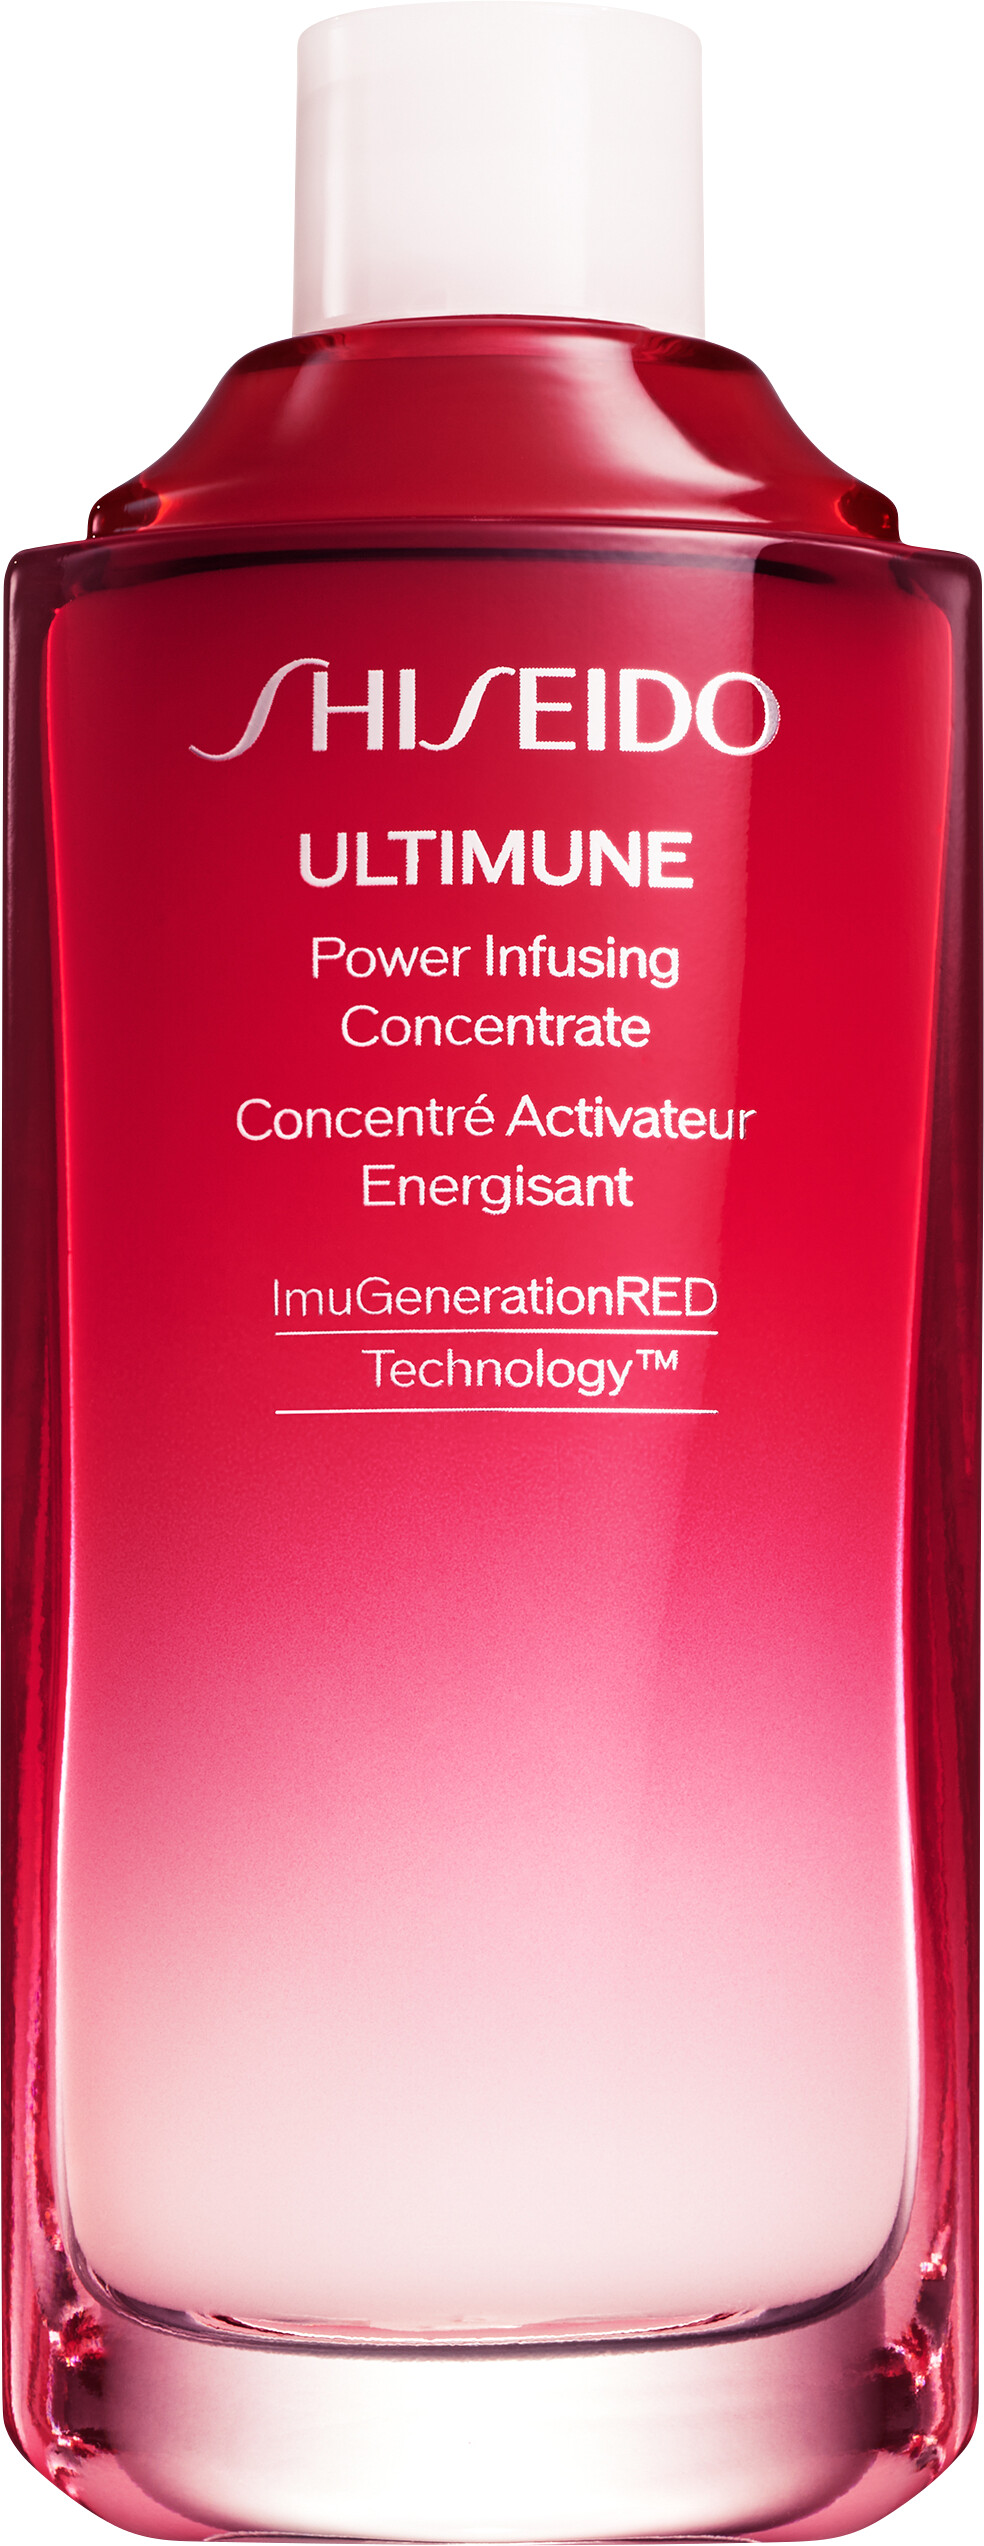 Shiseido Ultimune Power Infusing Concentrate with ImuGenerationRED Technology 3.0 Refill 75ml